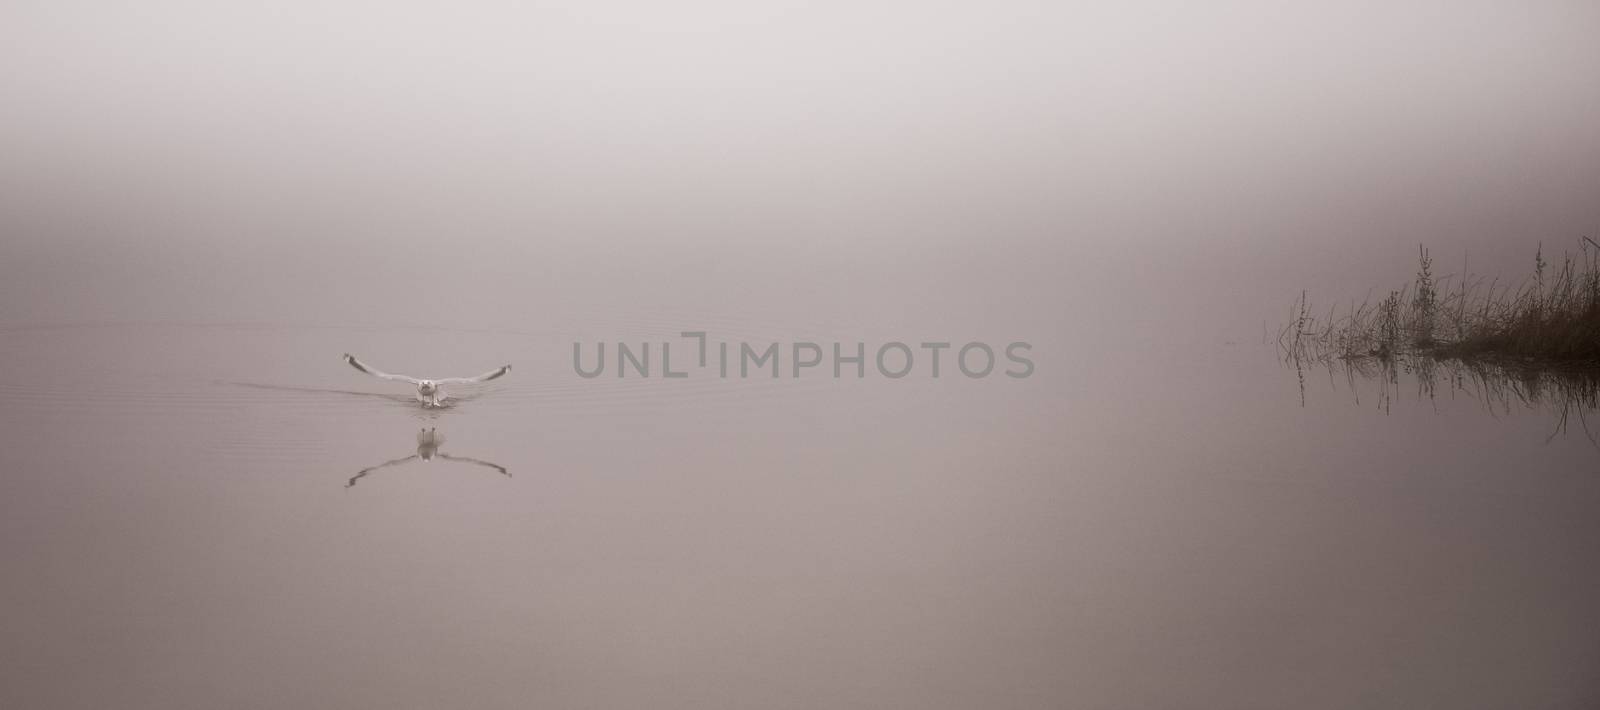 Seagull catches a crayfish in fog. by valleyboi63